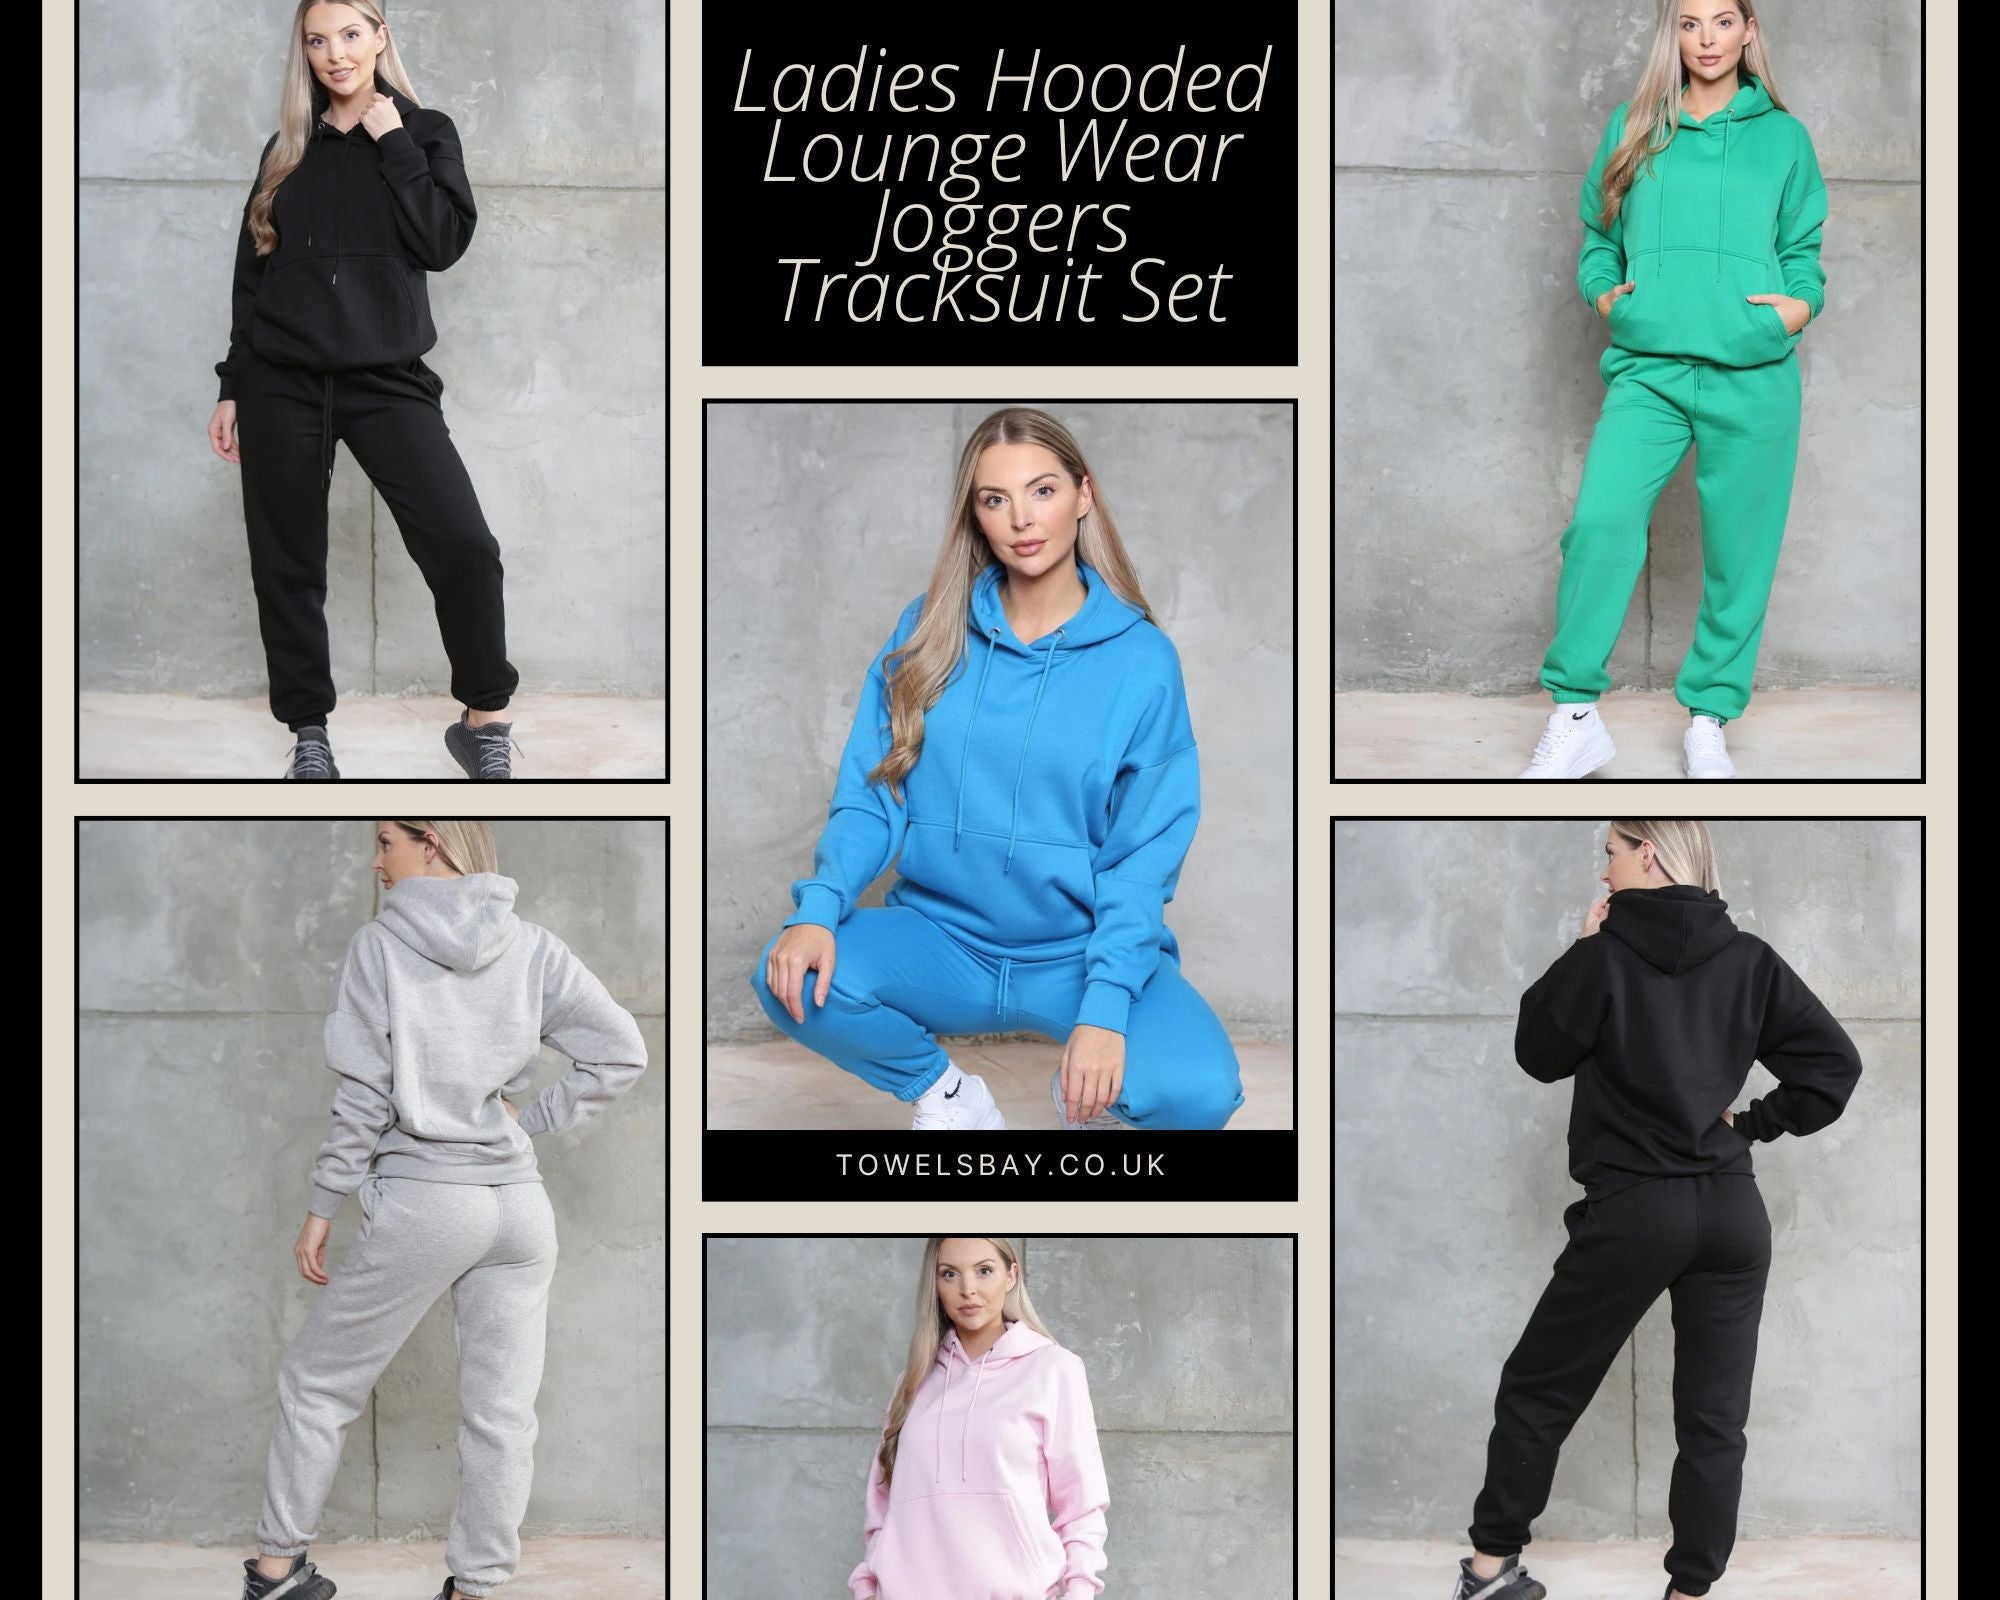 Women's Ruched Sleeve Lounge Wear Tracksuit Set with Oversized Hoodie